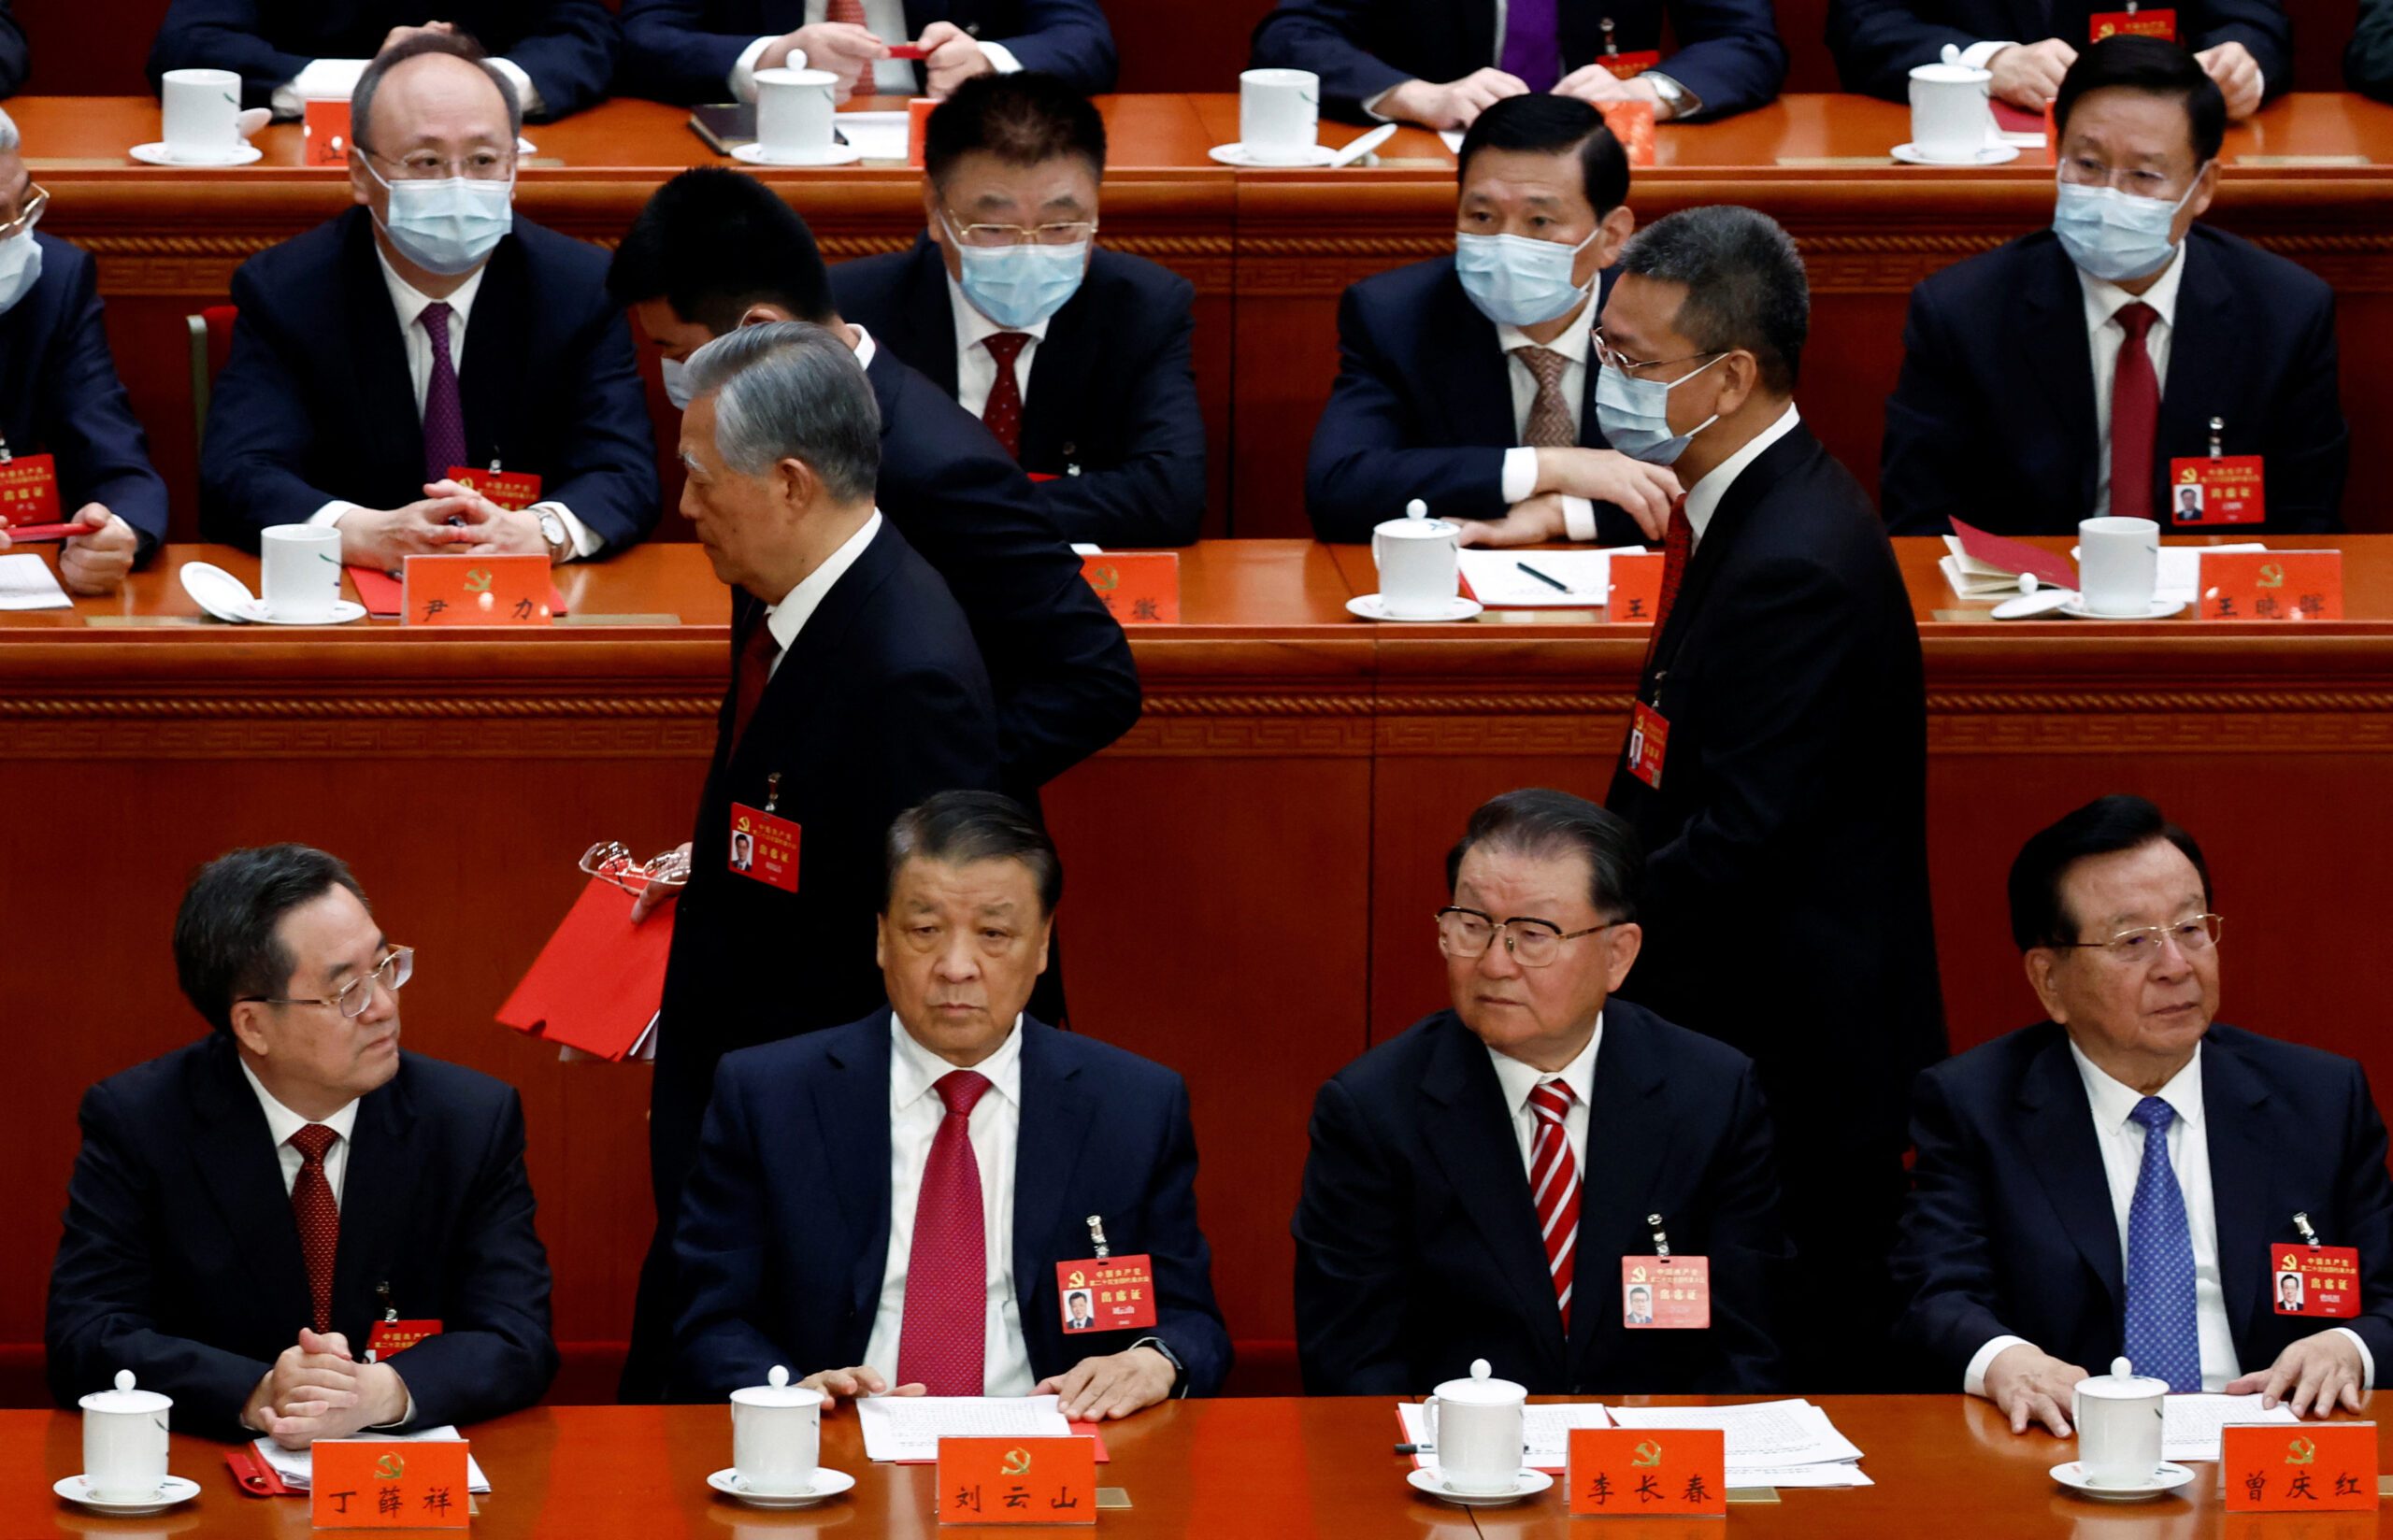 Chinese ex-president Hu Jintao escorted out of party congress